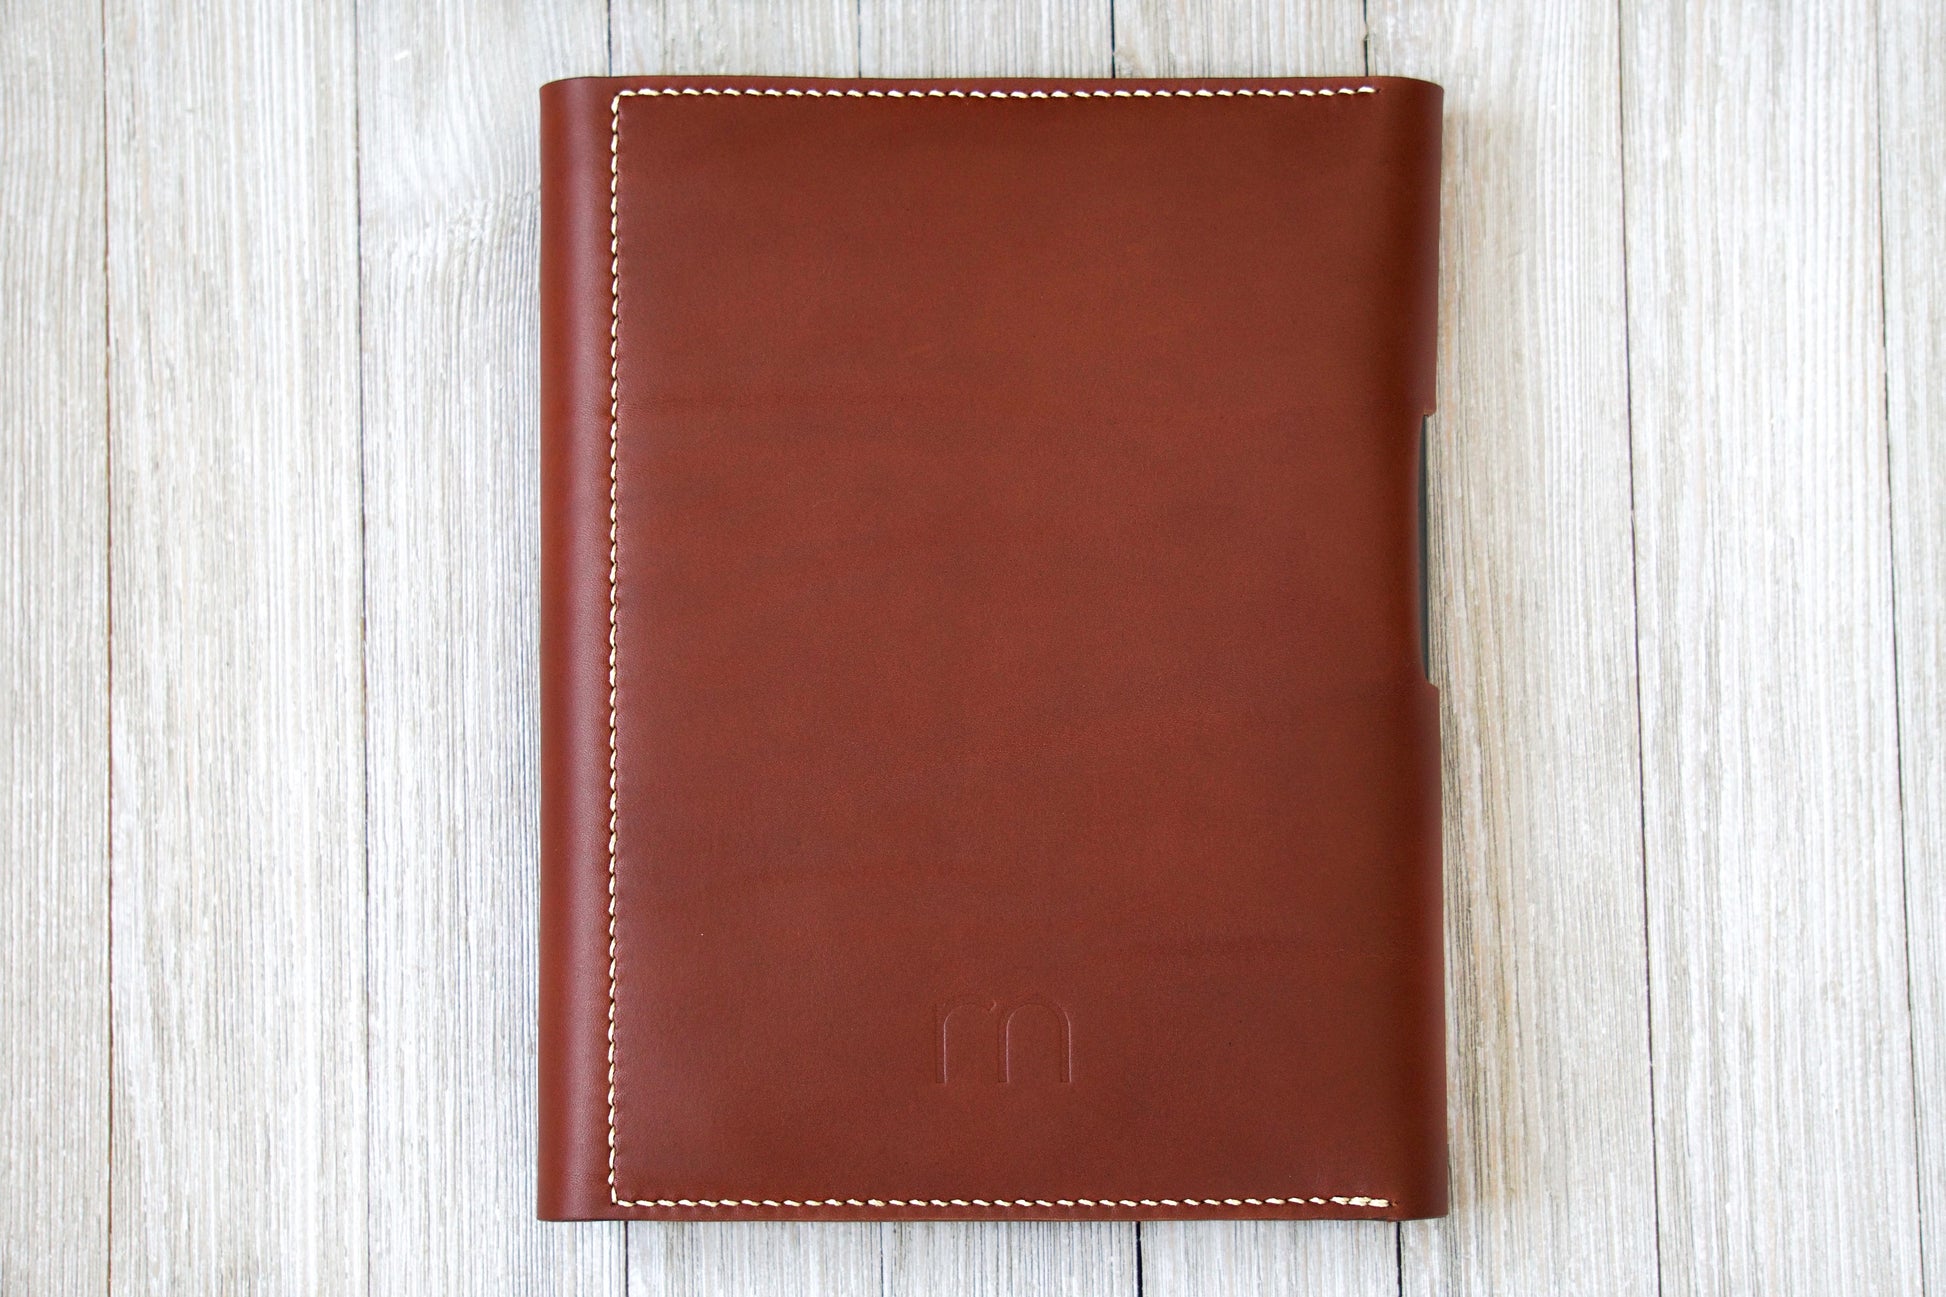 English Tan Bullet Journal Cover Back - Rugged Minimalist